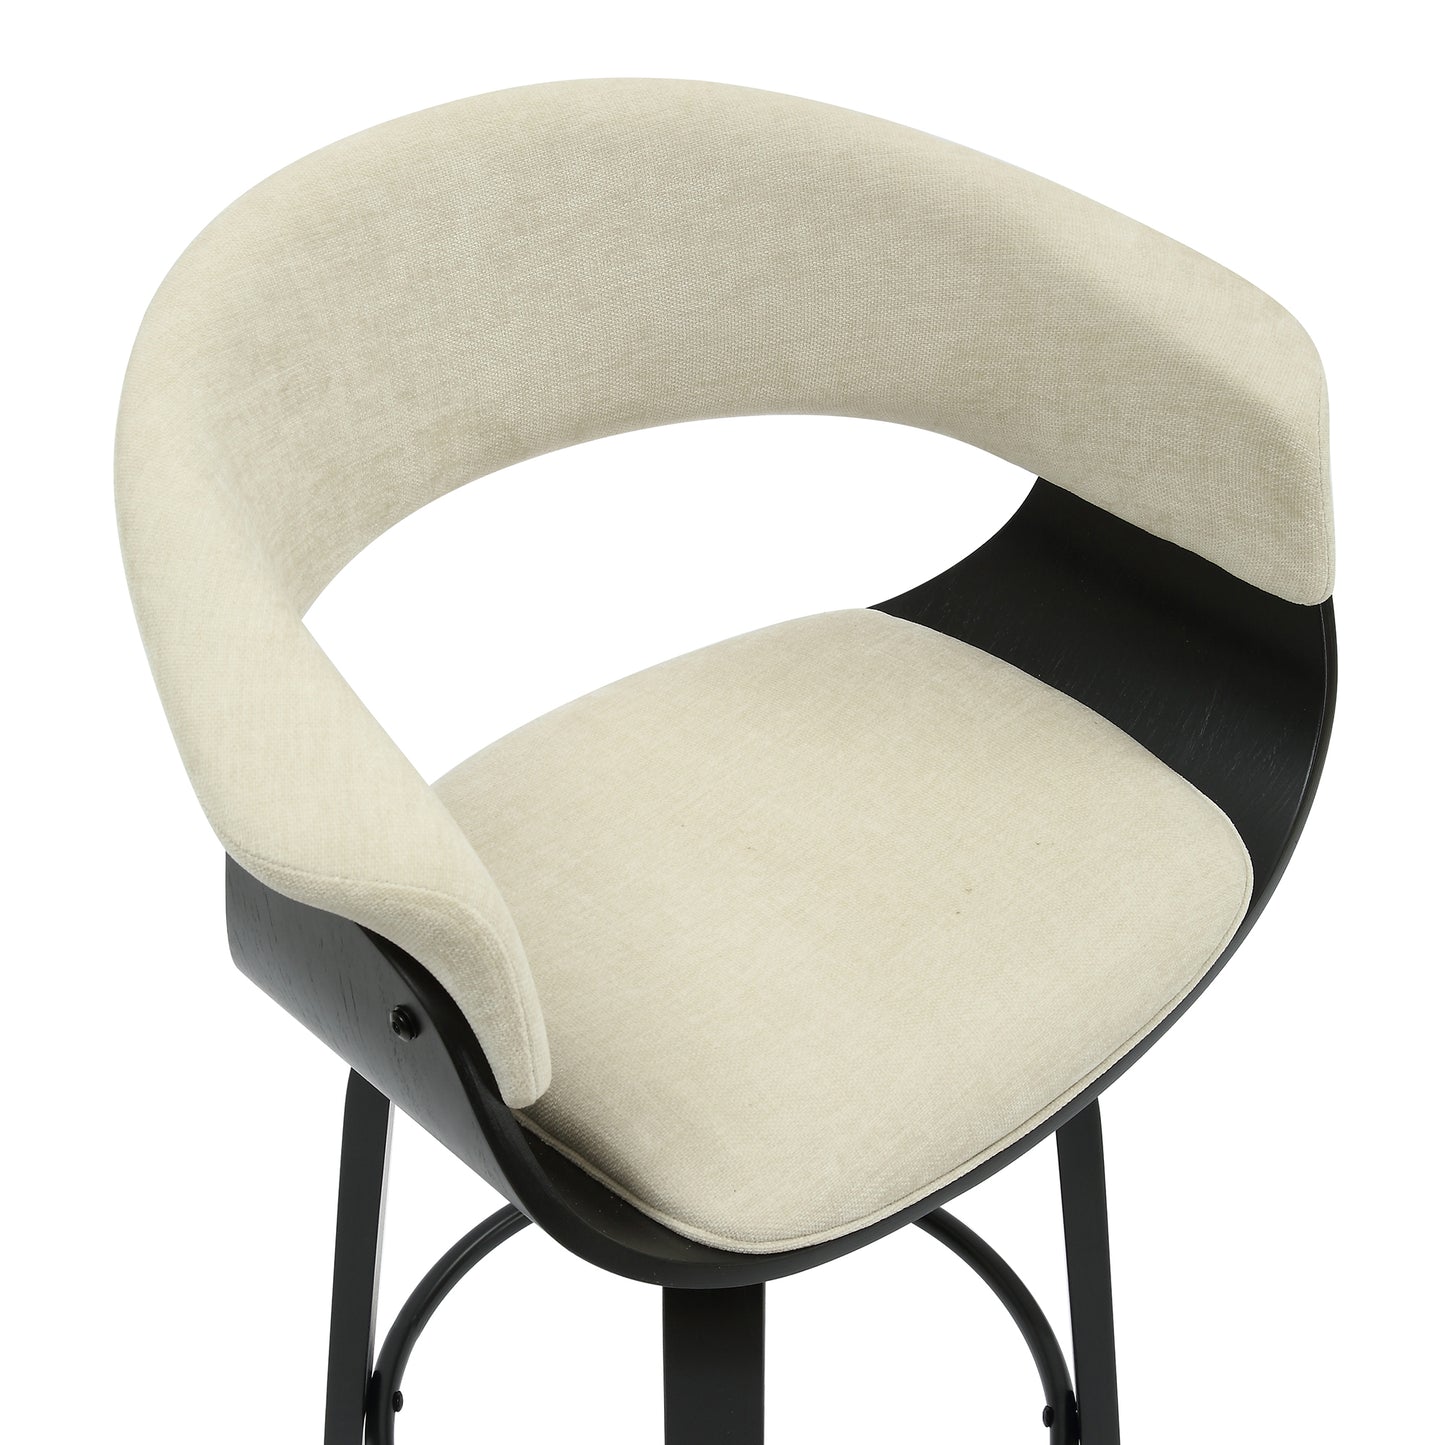 (HOLT BEIGE/ BLACK)- FABRIC COUNTER STOOL